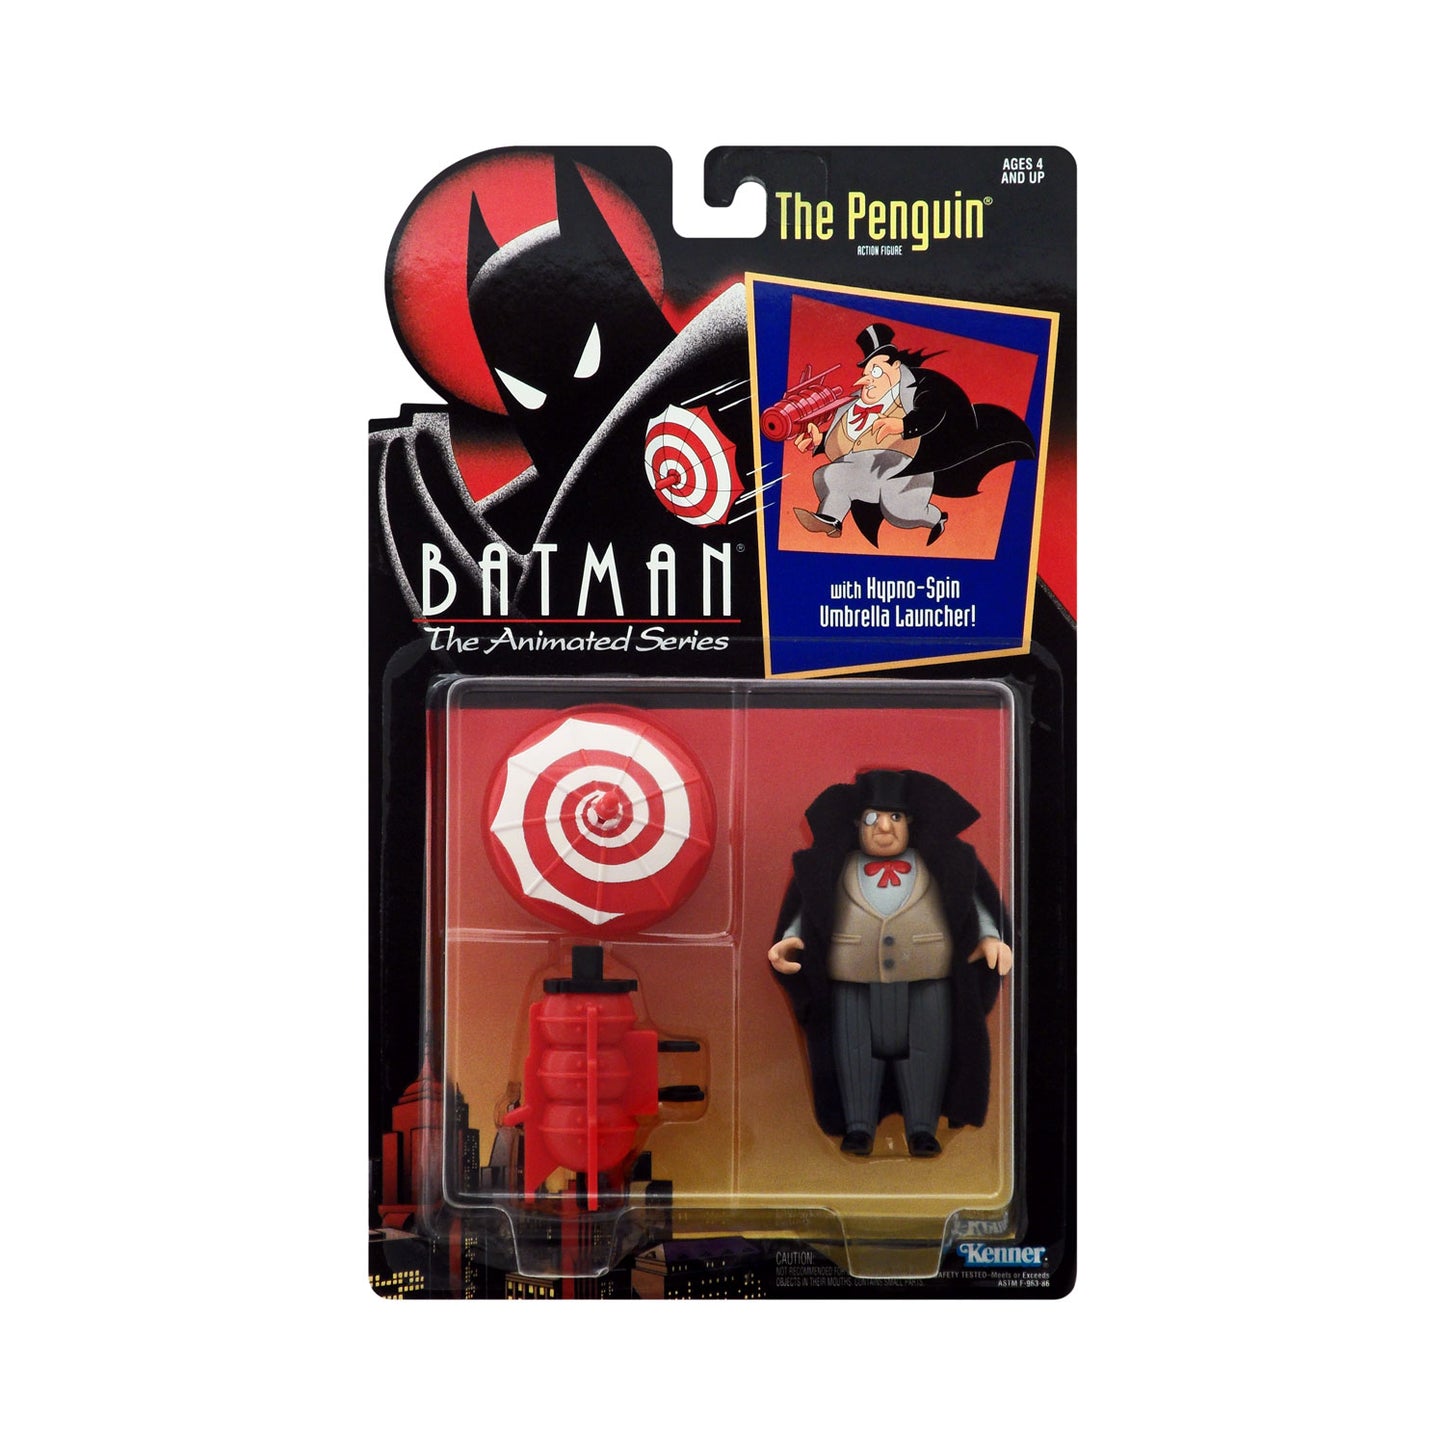 The Penguin Action Figure from Batman: The Animated Series